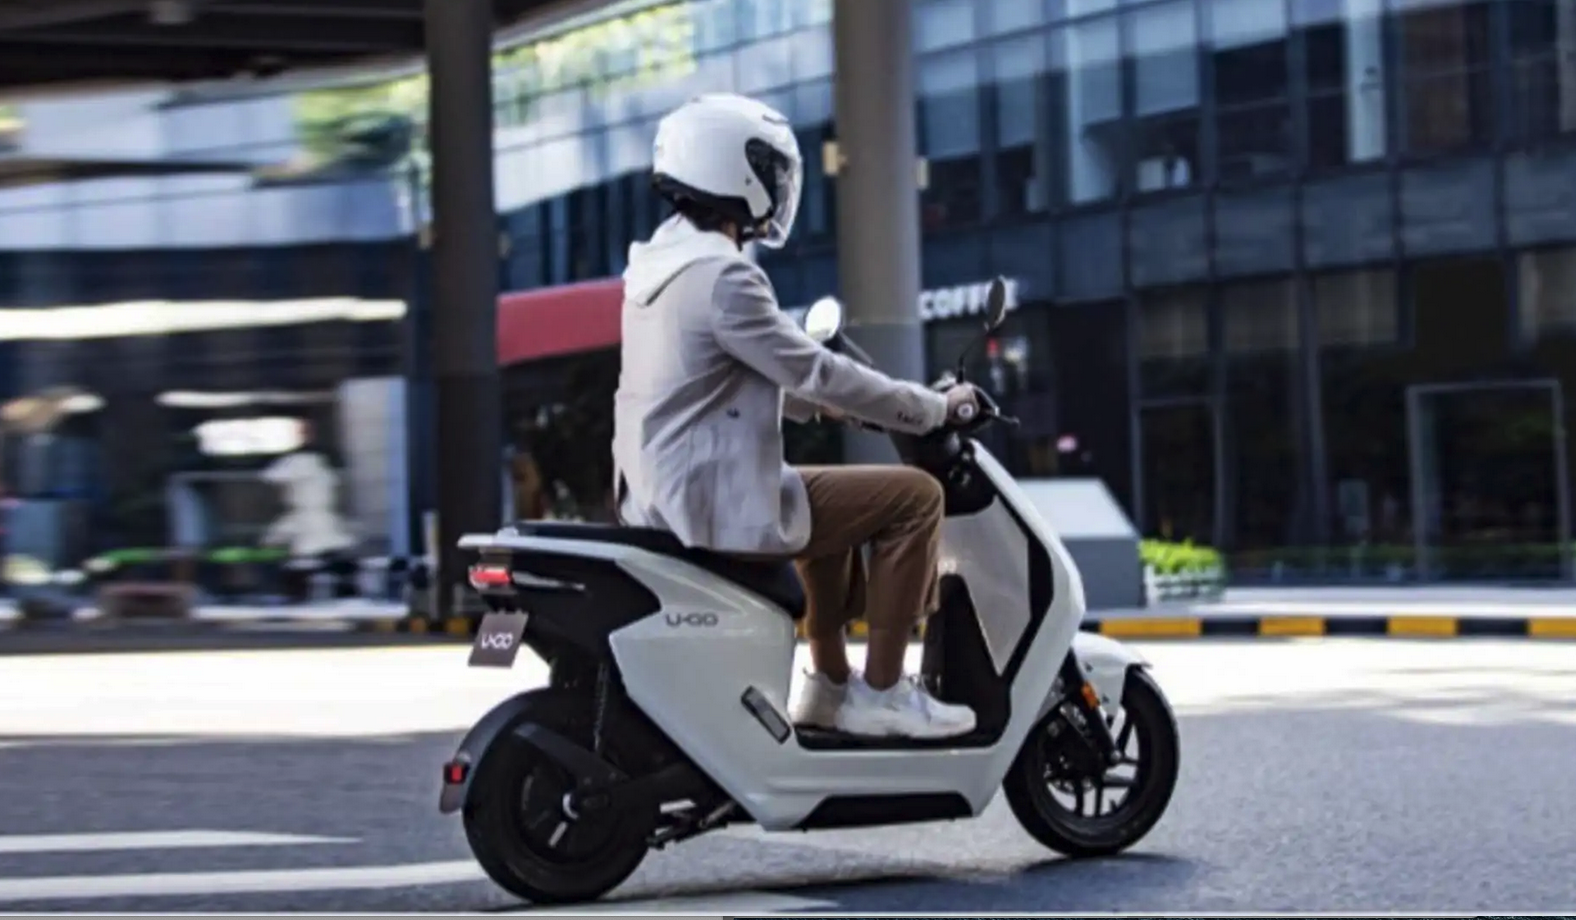 Honda launches electric U-GO Scooter under €1 000 in China